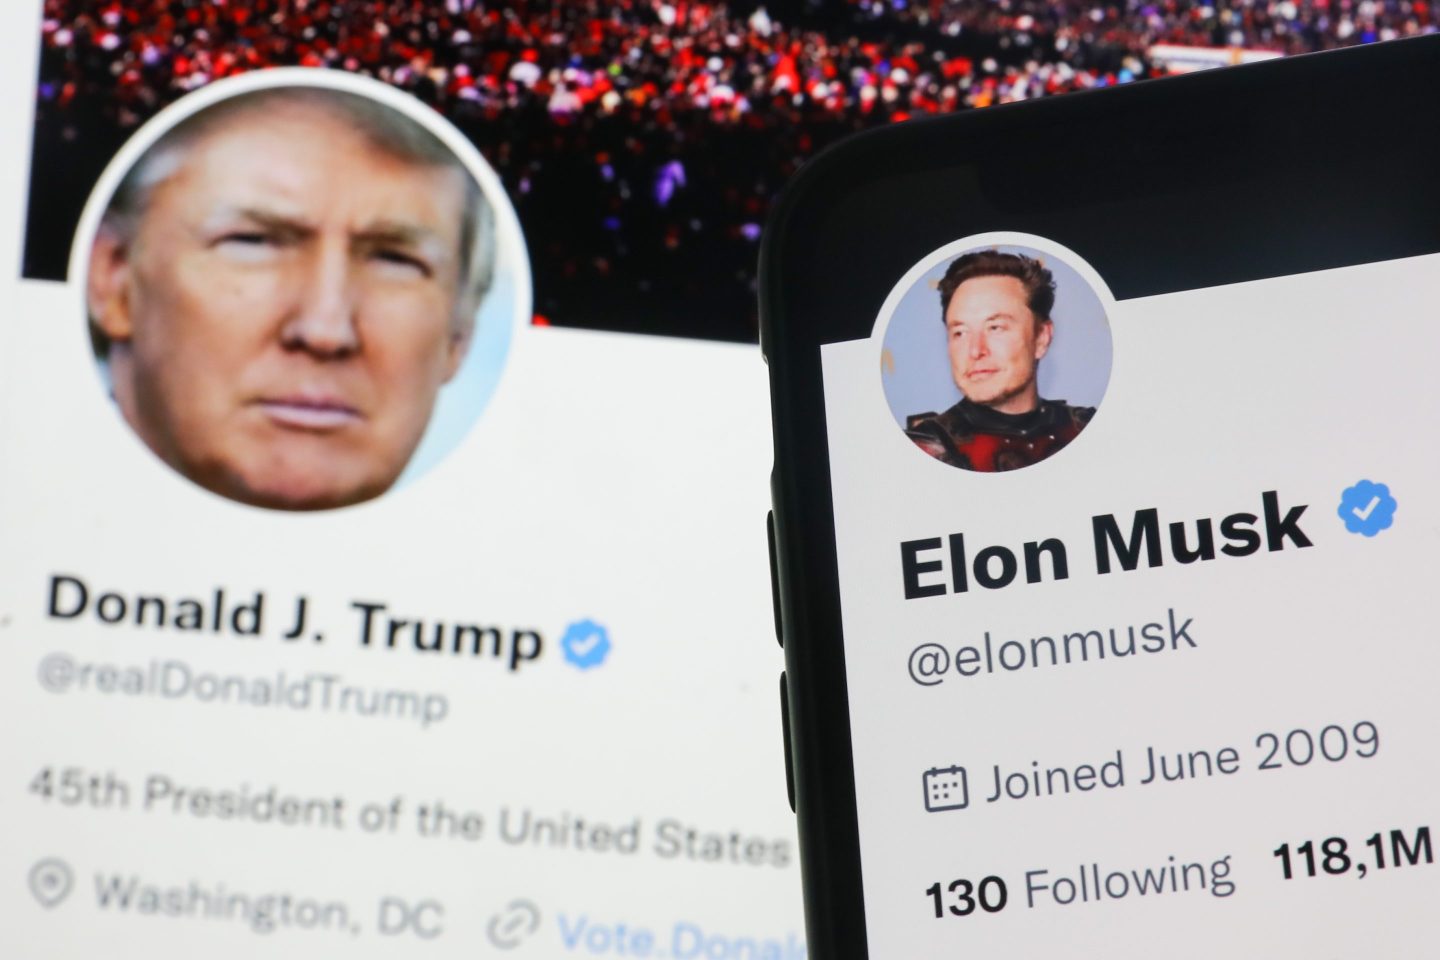 Donald Trump Twitter account displayed on a laptop screen and Elon Musk Twitter account displayed on a phone screen are seen in this illustration photo taken in Krakow, Poland on November 22, 2022. (Photo by Jakub Porzycki/NurPhoto via Getty Images)